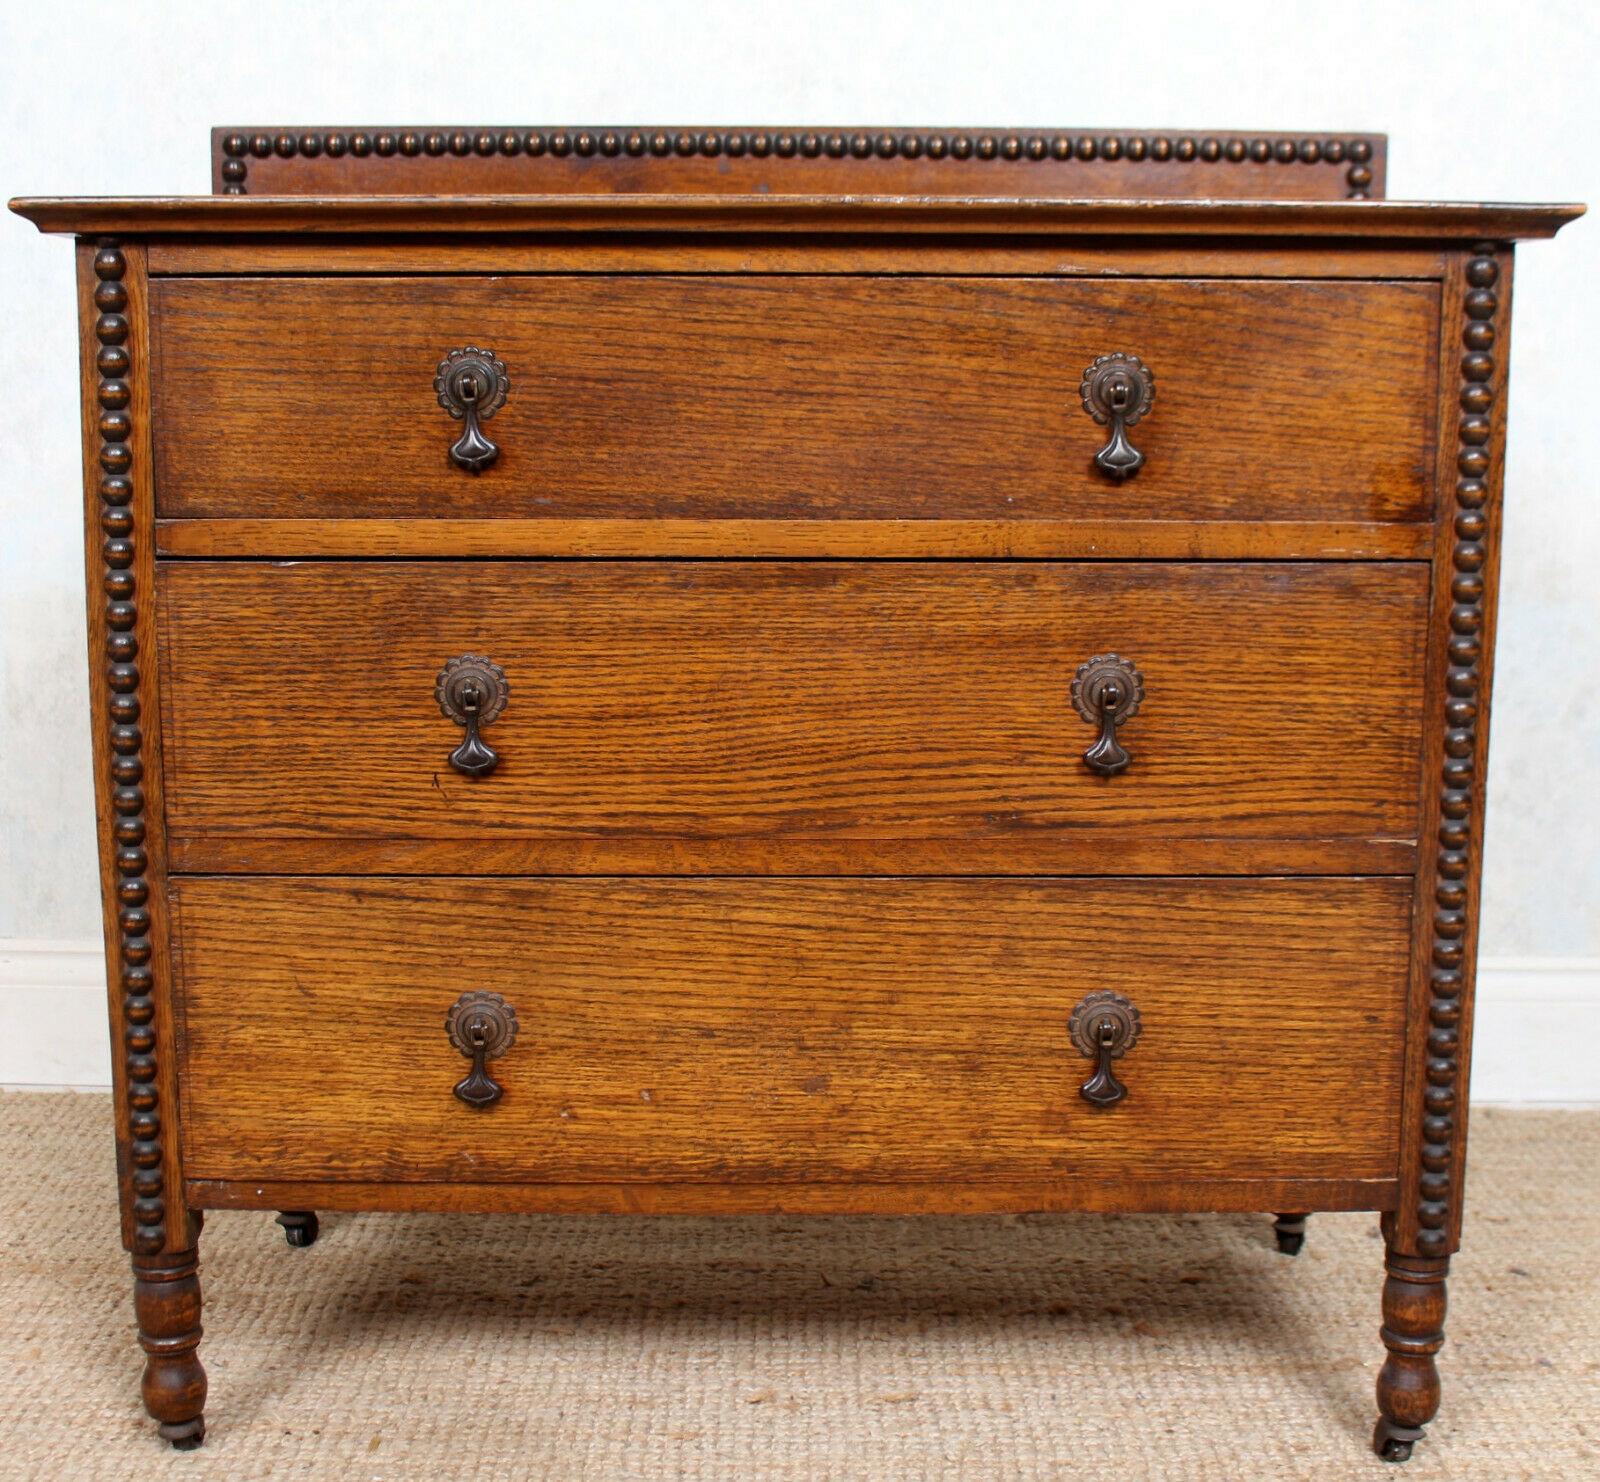 An impressive Arts & Crafts oak chest of drawers.

The oak boasting a well figured wild golden swirling and flecked grain and rich patina.

The backrail with decorative beaded borders. Fitted three long graduated drawers - flanked by matched